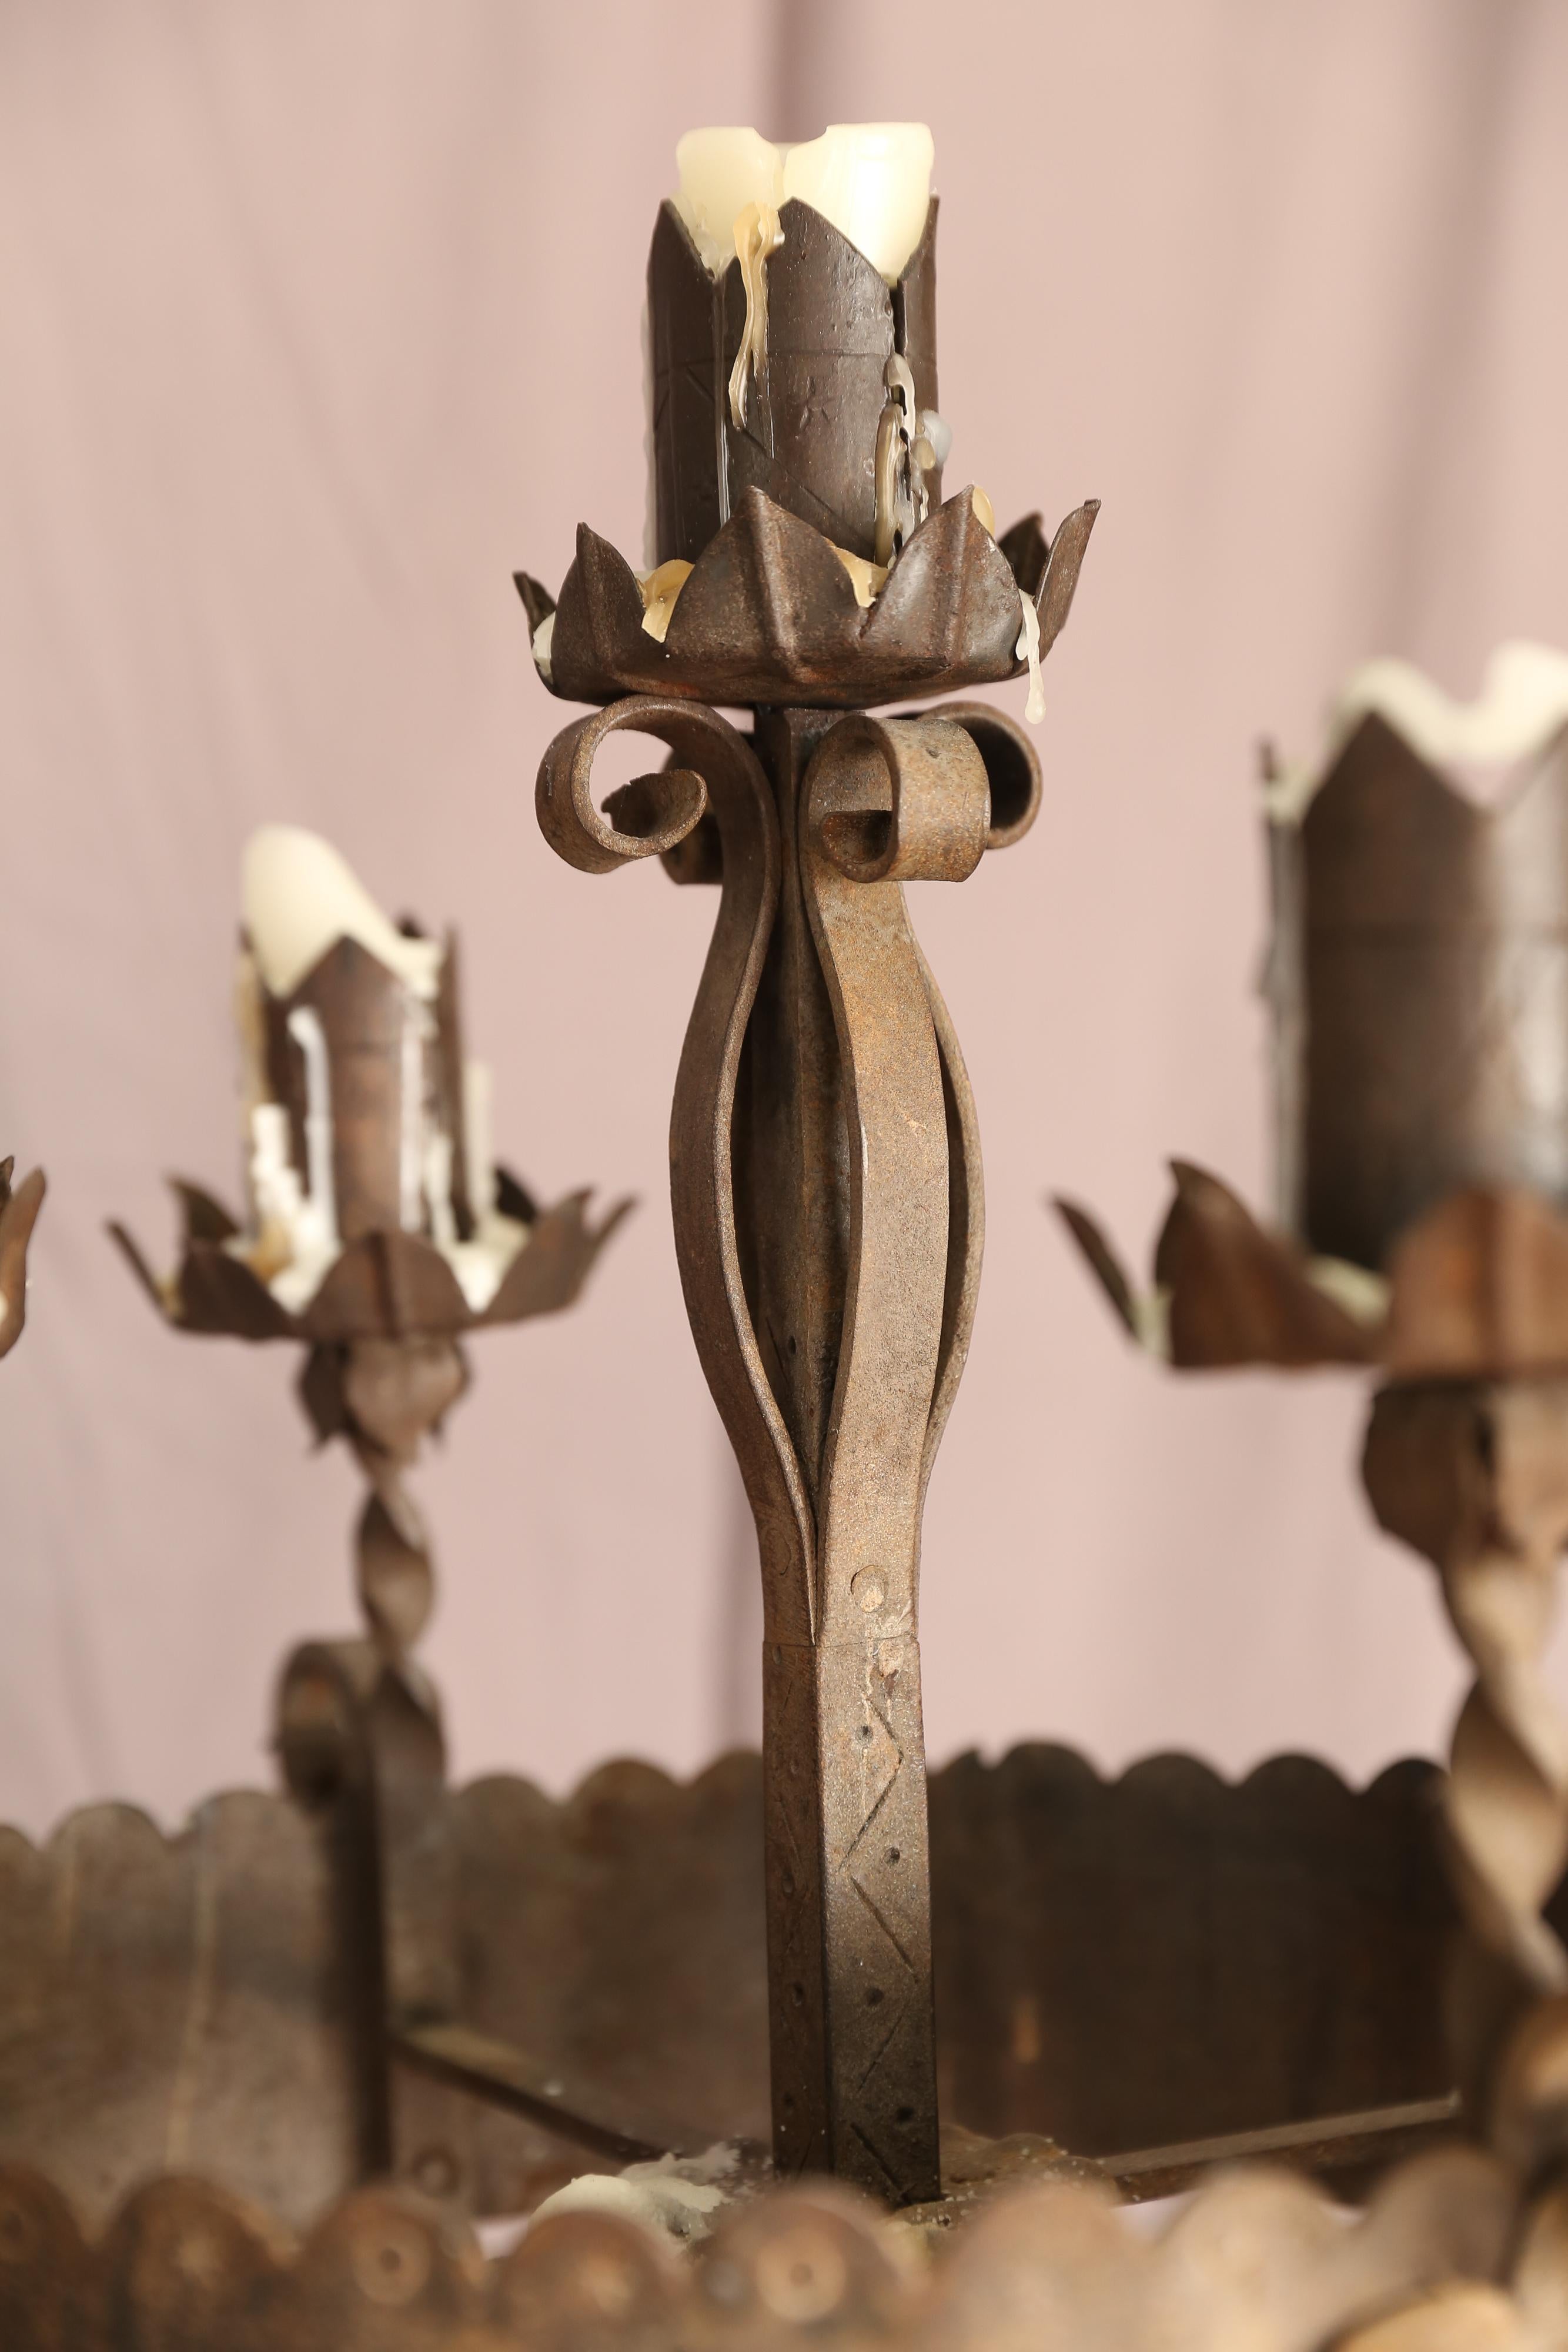 French 19th Century Hand-Wrought Iron Candlestick